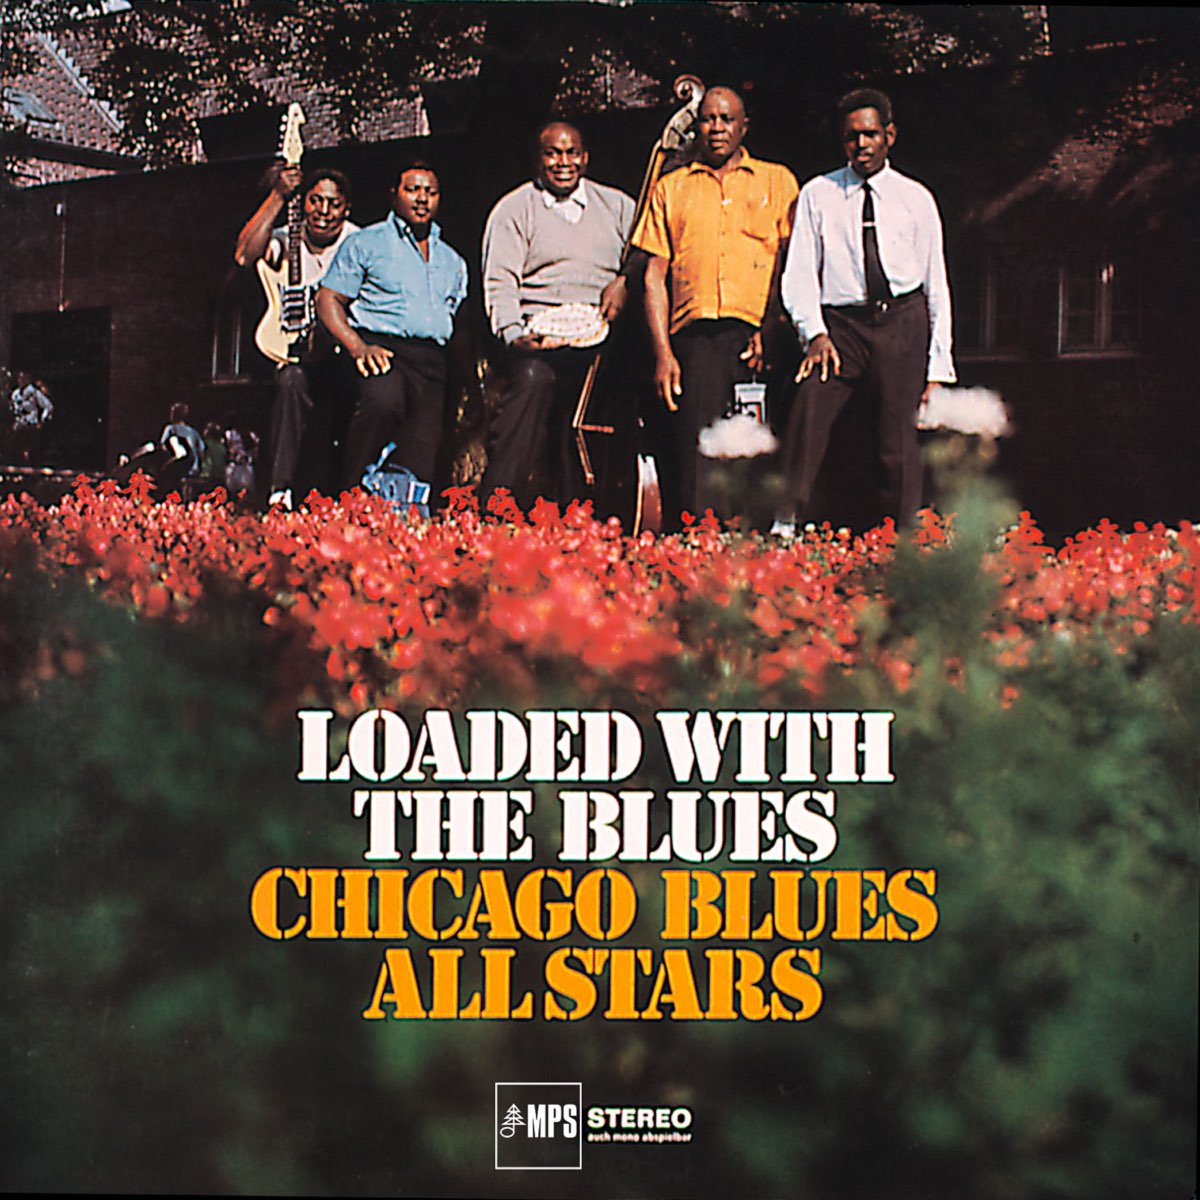 Loaded with the Blues di The Chicago Blues All Stars su Apple Music